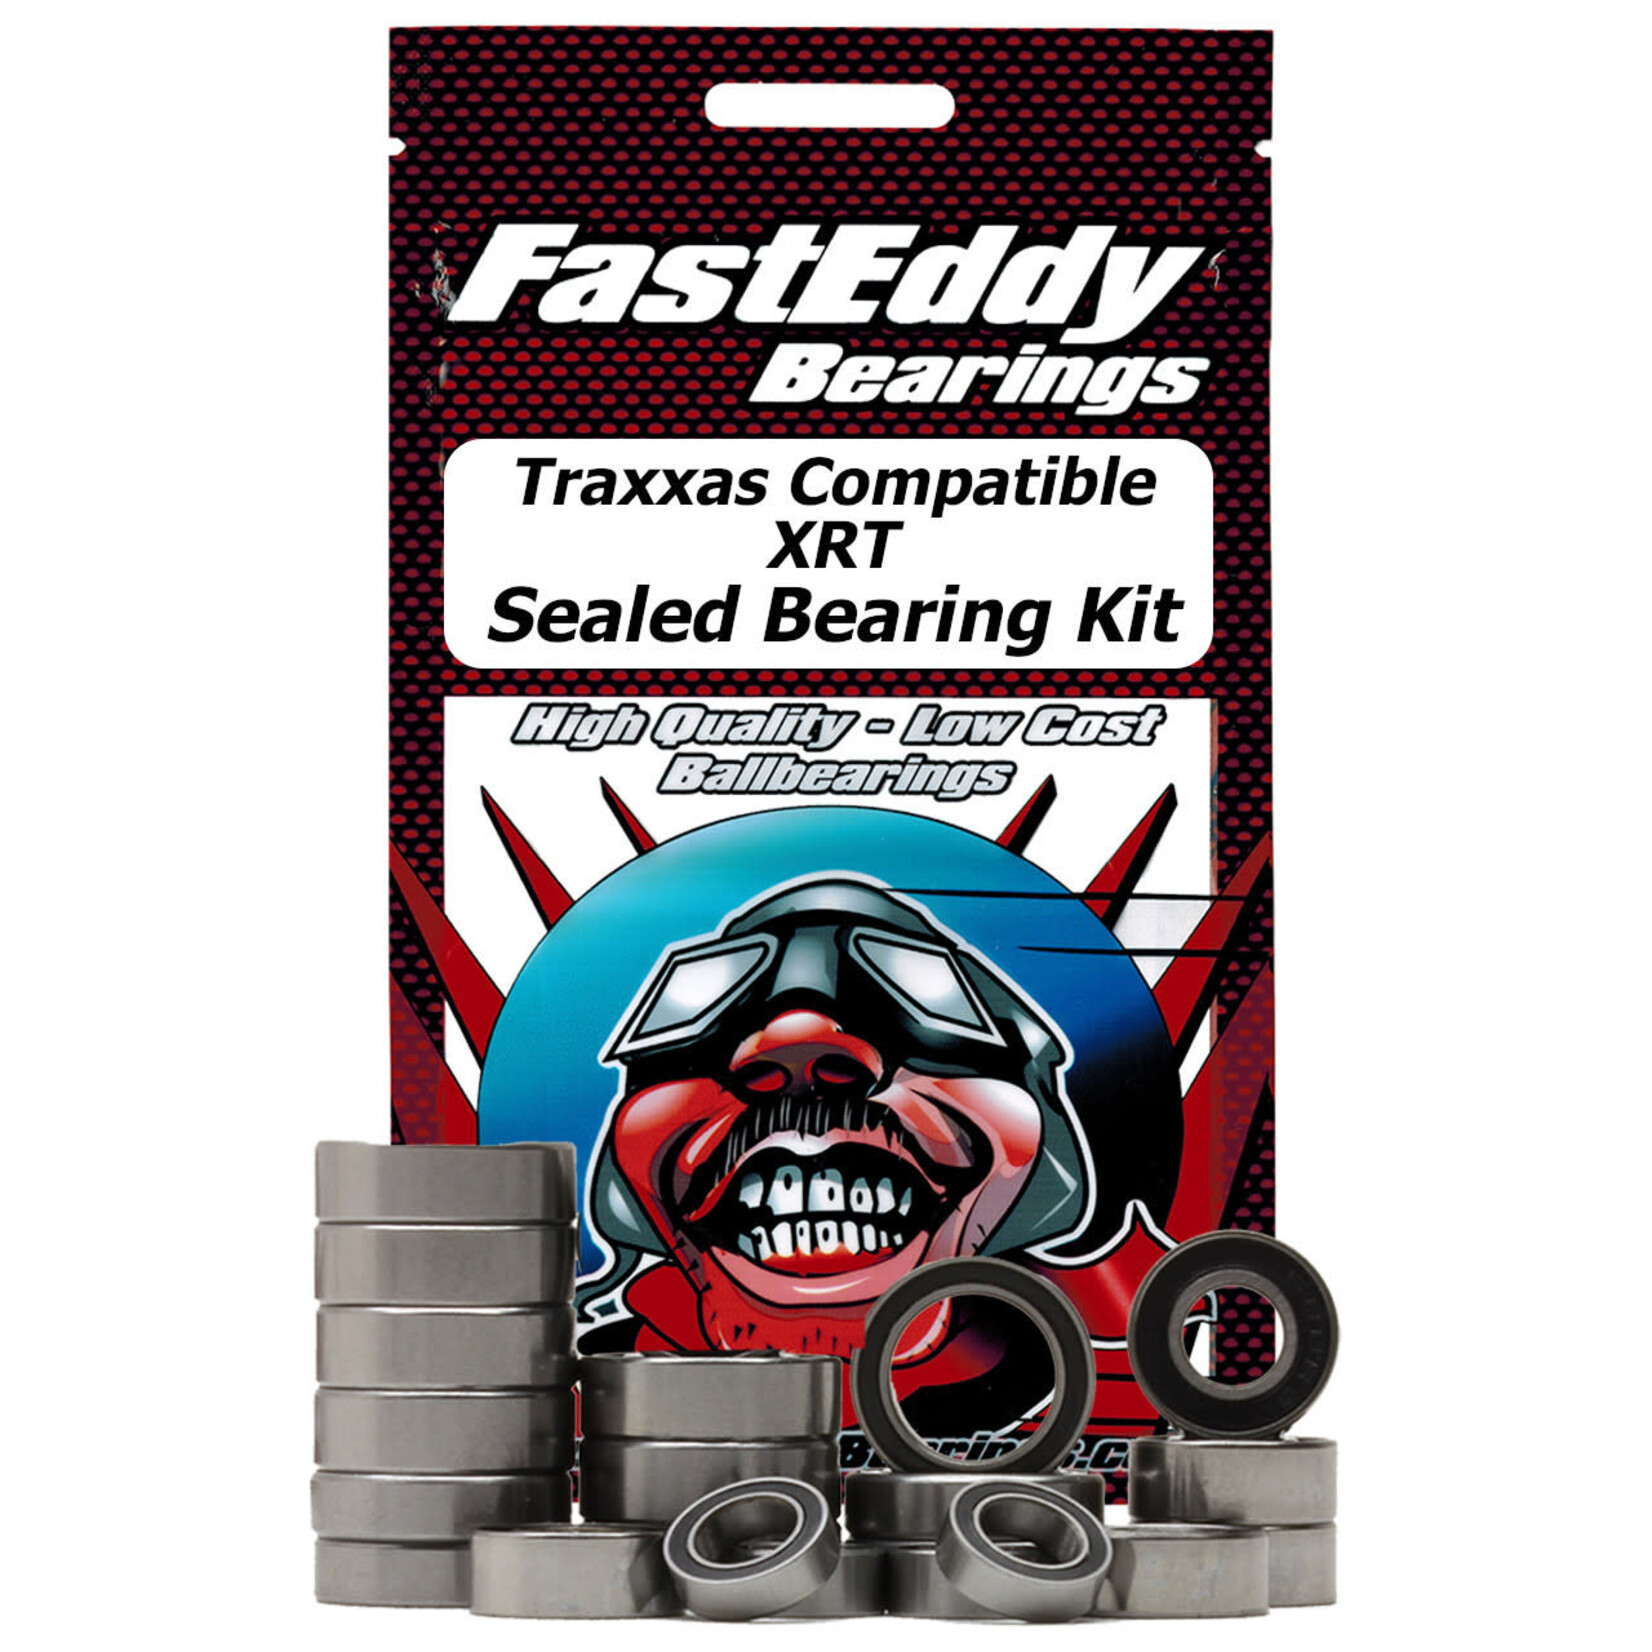 FastEddy FastEddy Bearings Traxxas Compatible XRT Sealed Bearing Kit #TFE8074